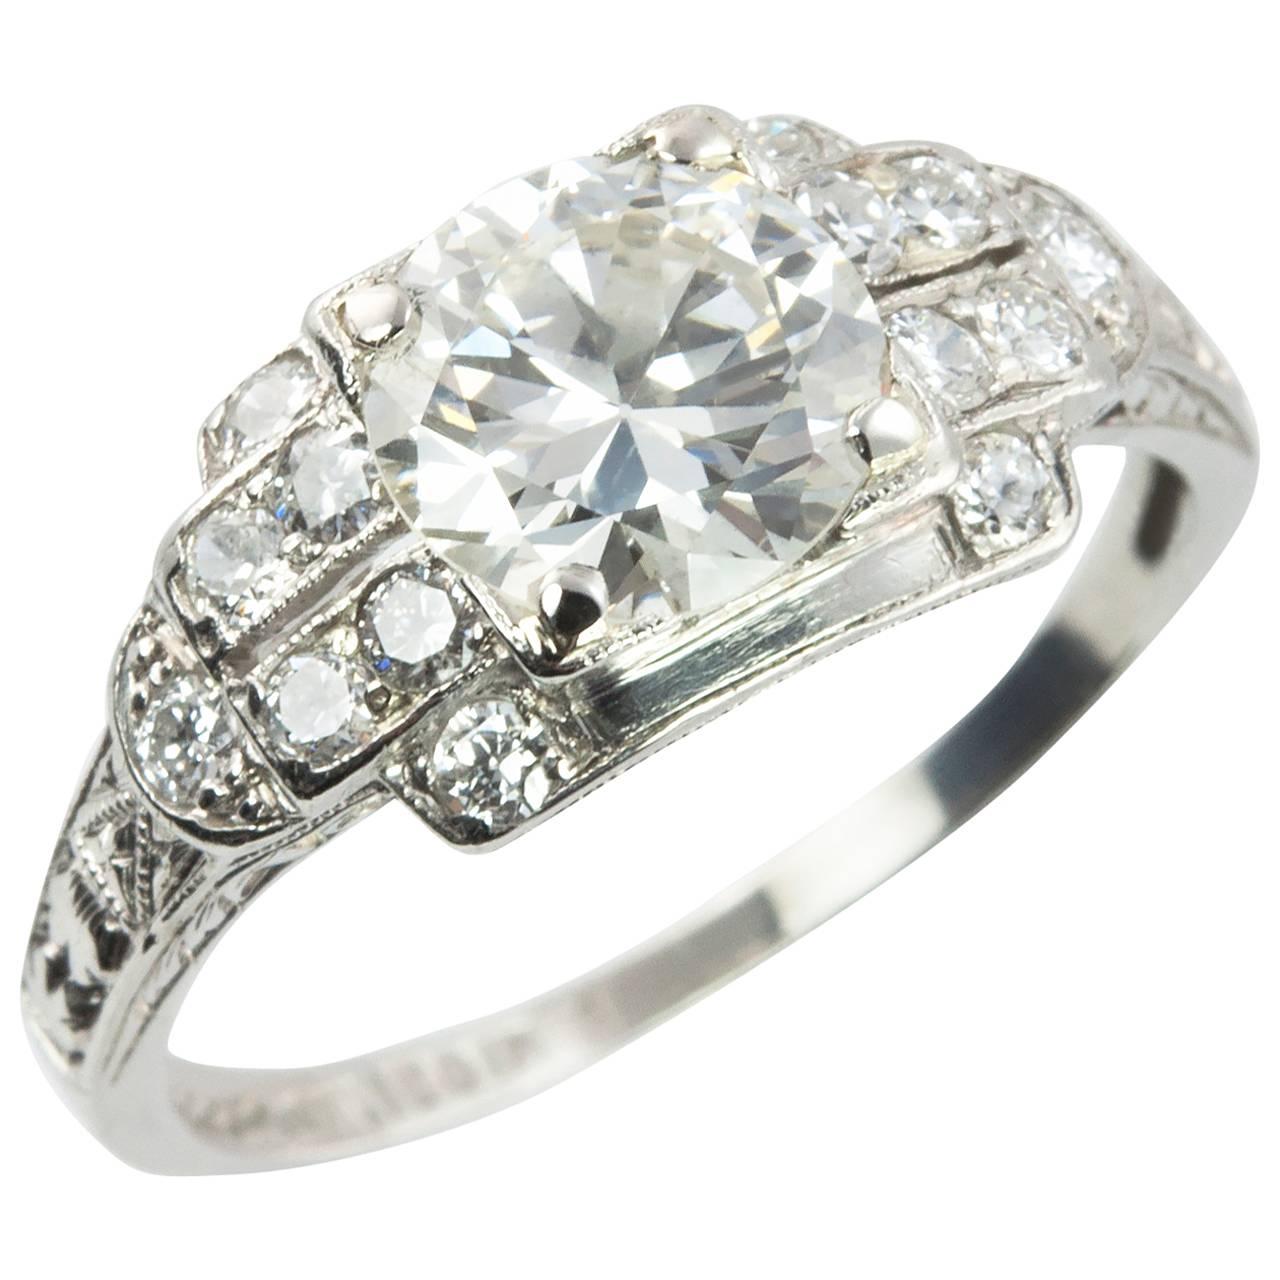 1.02 Carat Old European Cut Diamond and Platinum Engagement Ring For Sale